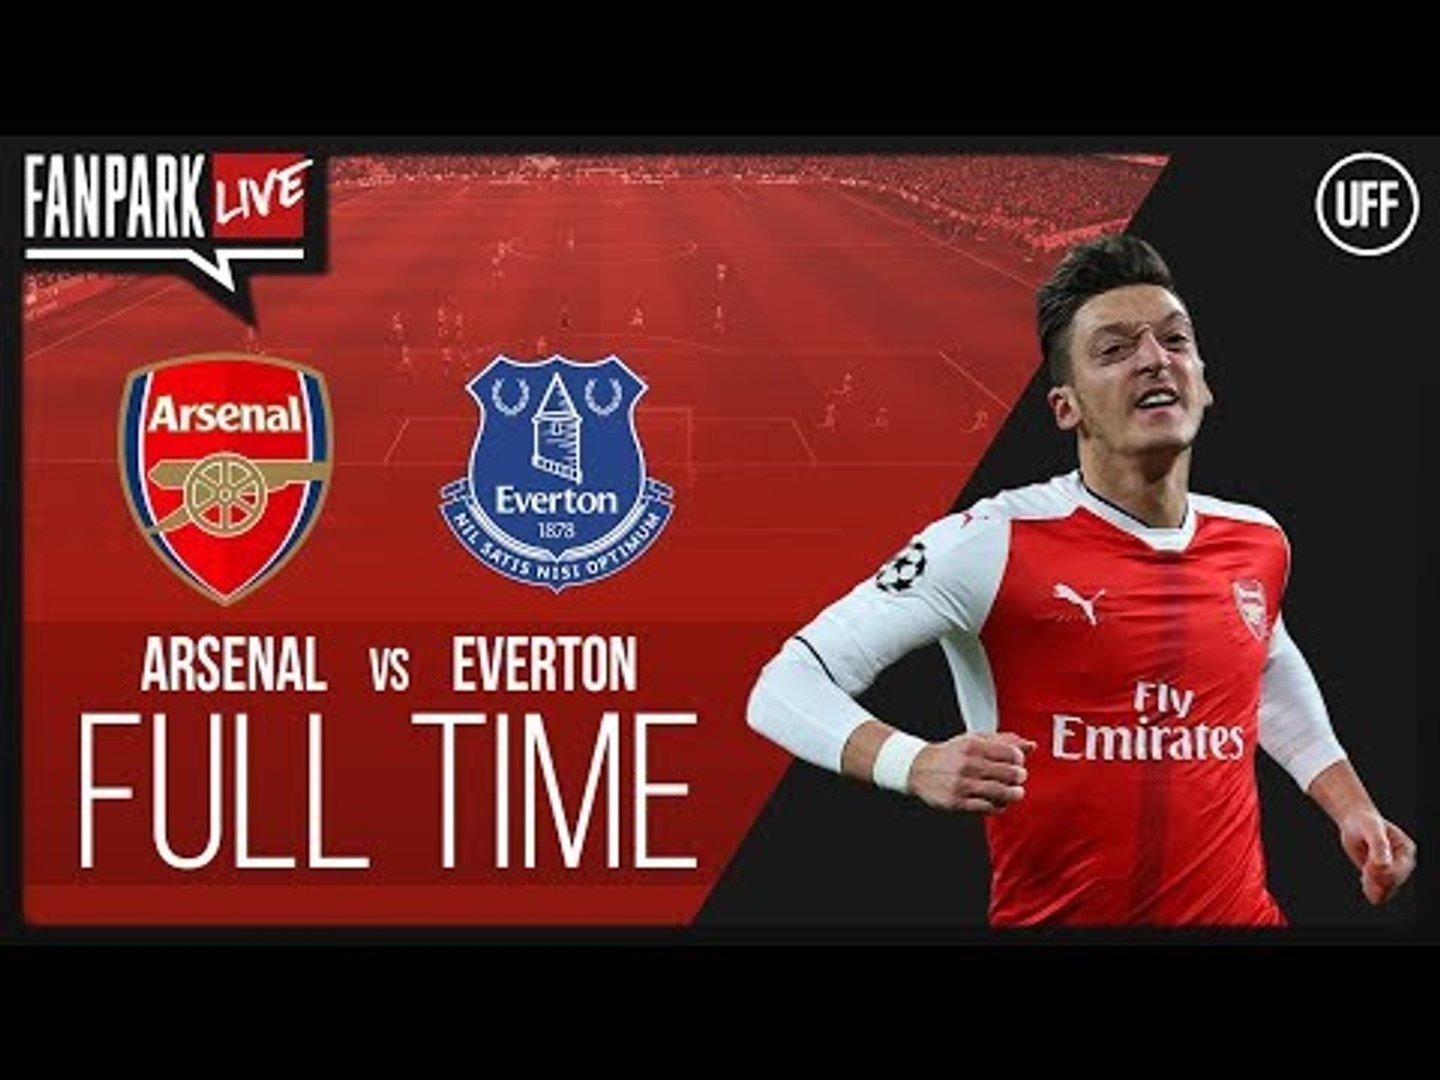 Arsenal 5 - 1 Everton - Full Time Phone In - FanPark Live